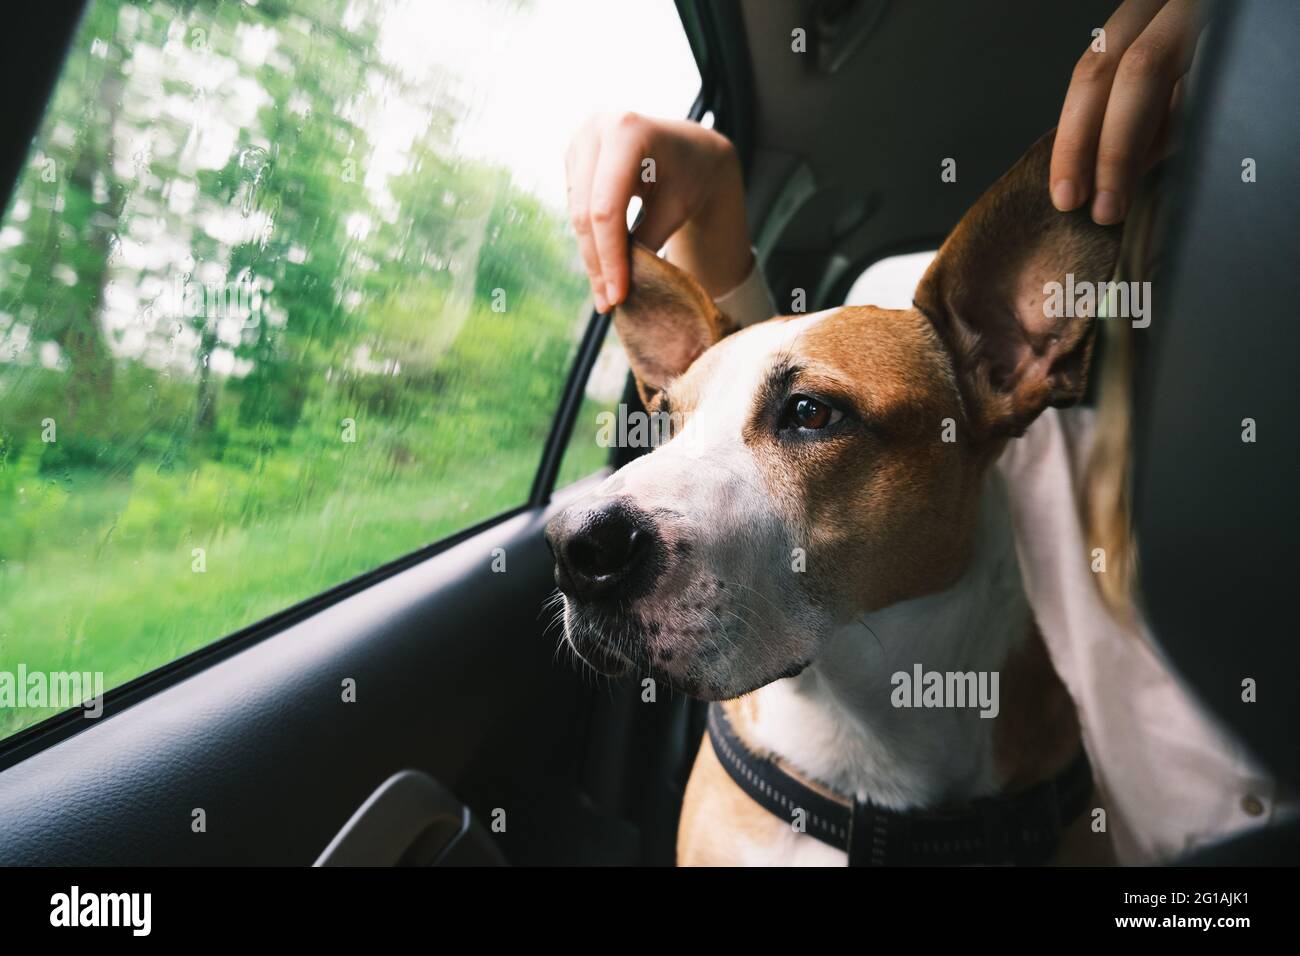 Funny dog with big ears in the car by the window Stock Photo